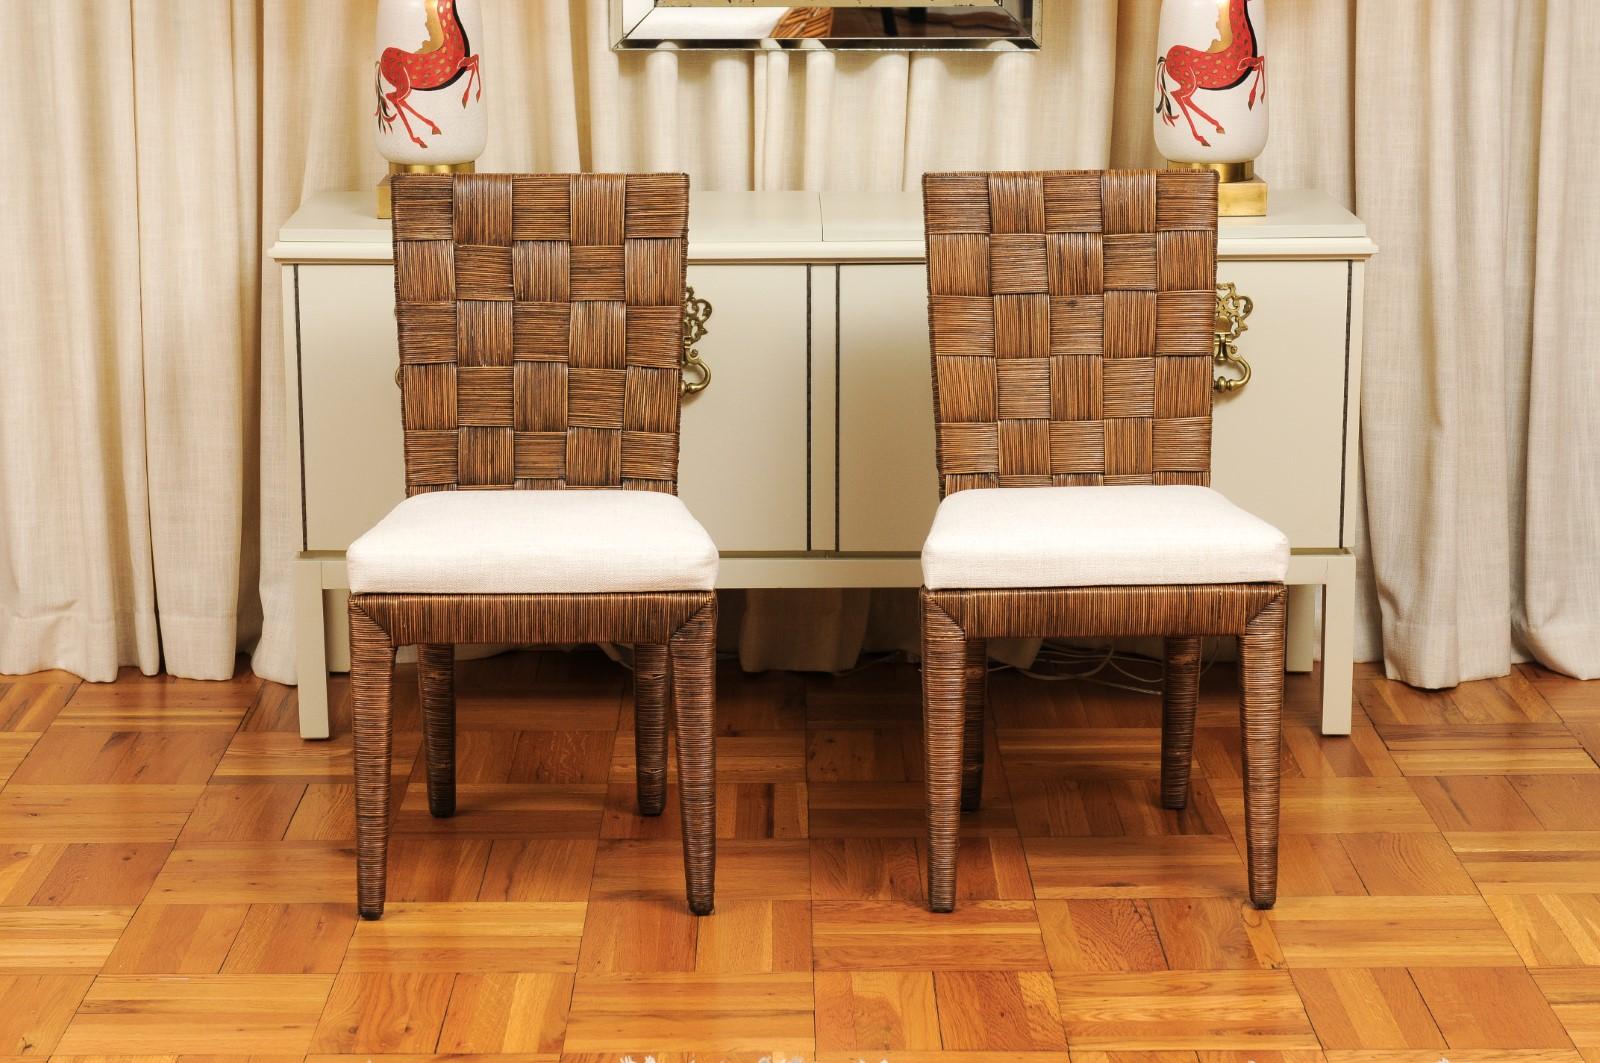 Stellar Restored Set of 16 Block Island Cane Chairs by John Hutton for Donghia For Sale 11